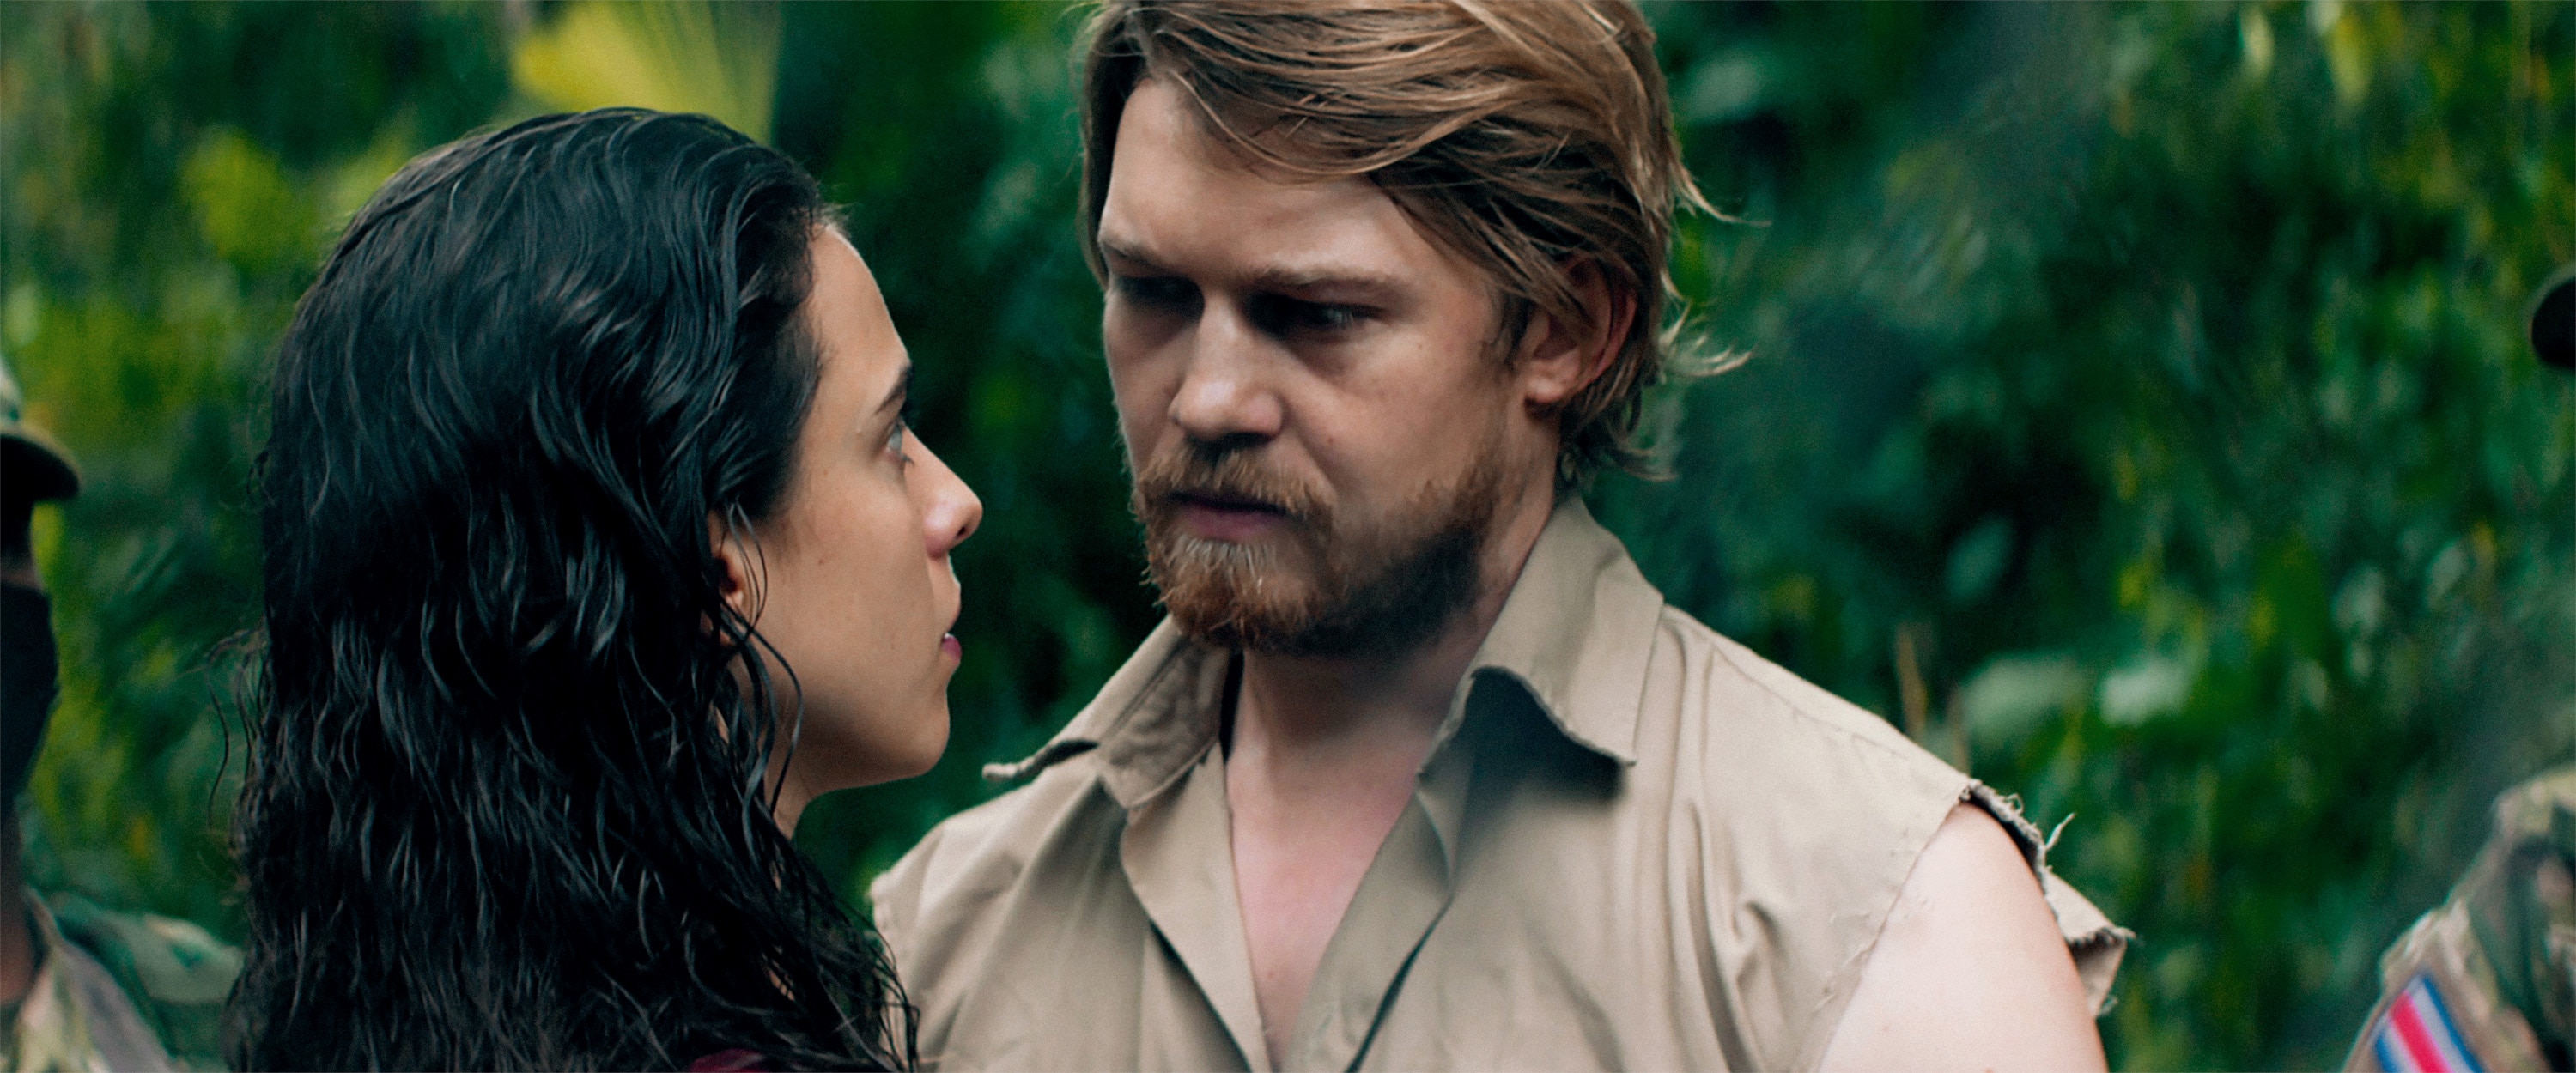 Stars at Noon finds Joe Alwyn and Margaret Qualley in a steamy love affair in present-day Nicaragua image